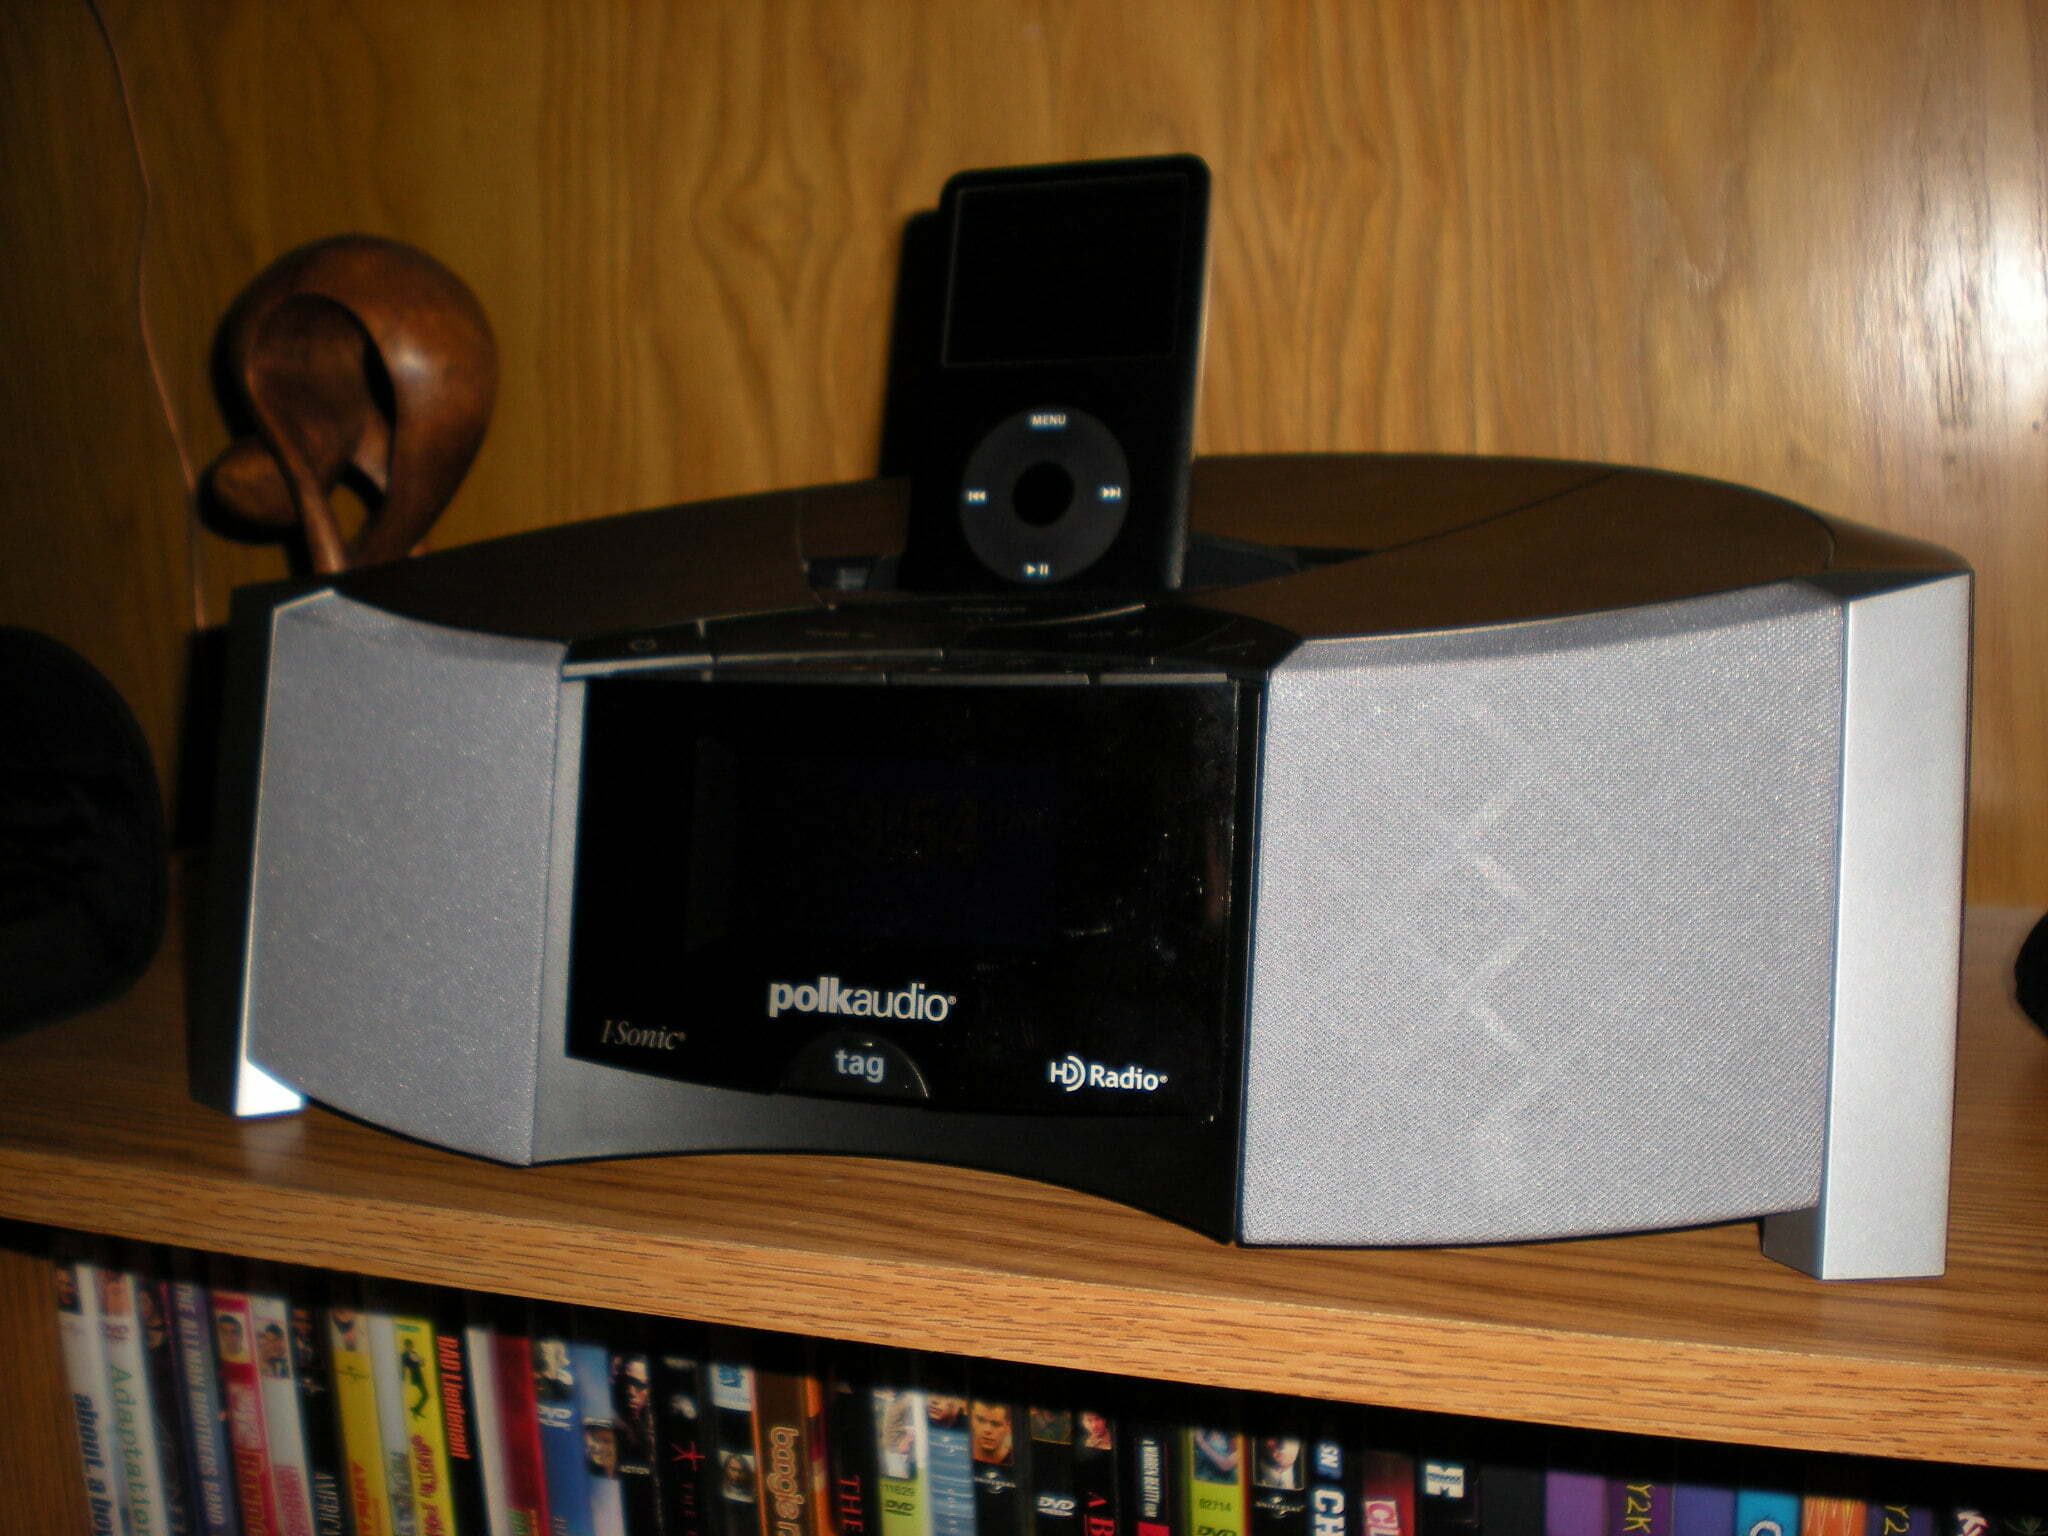 Polk Audio I-Sonic HD Radio And iPod Speaker System Review